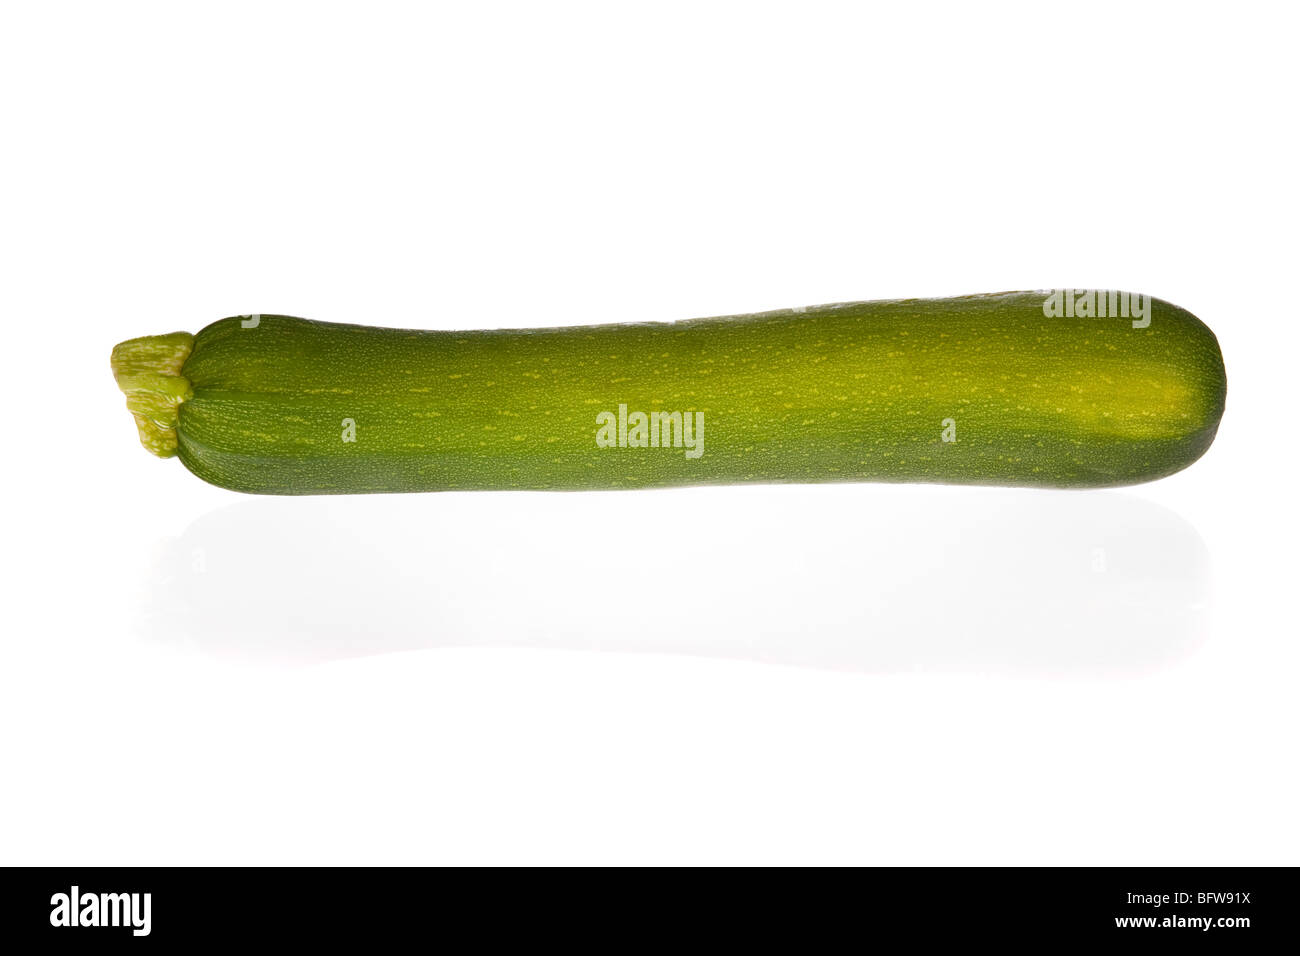 Zucchini or courgette isolated on a white background Stock Photo